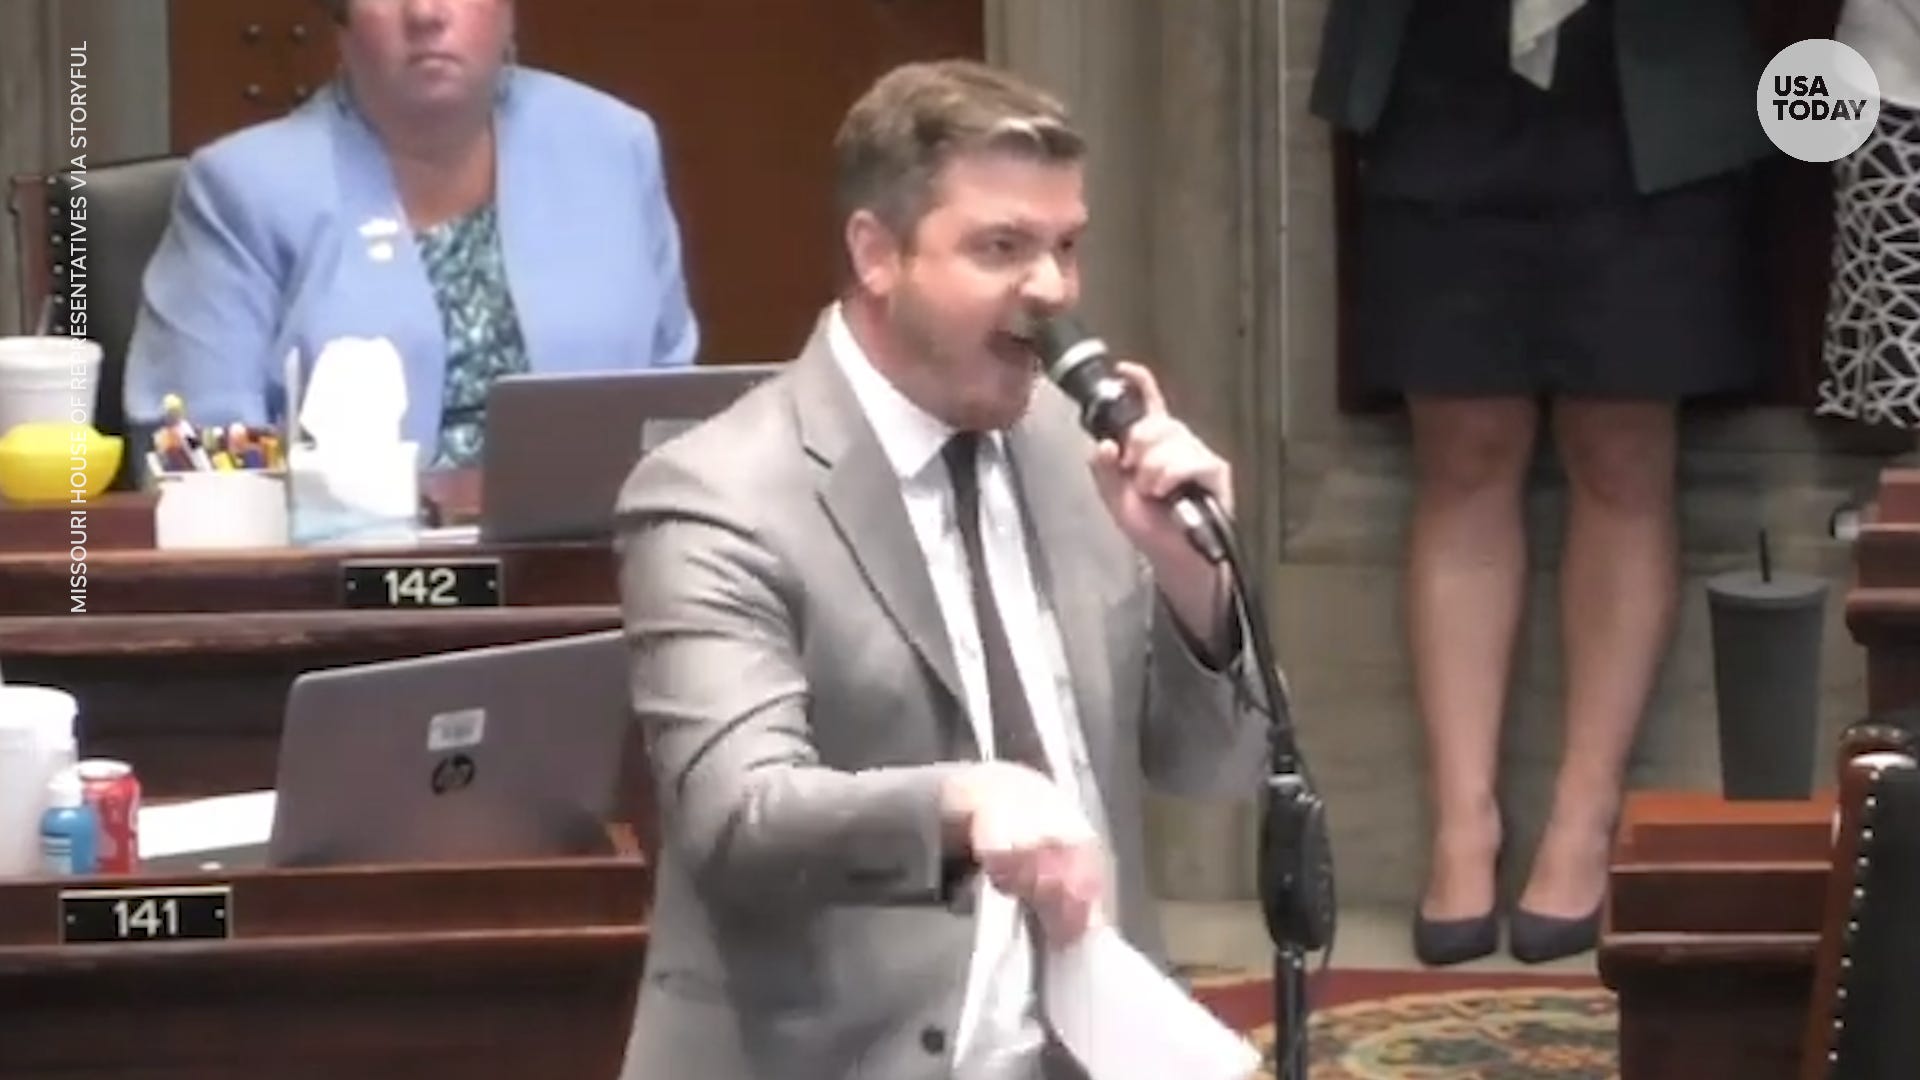 Gay lawmaker spars with Republican over anti-trans bill | USA TODAY￼